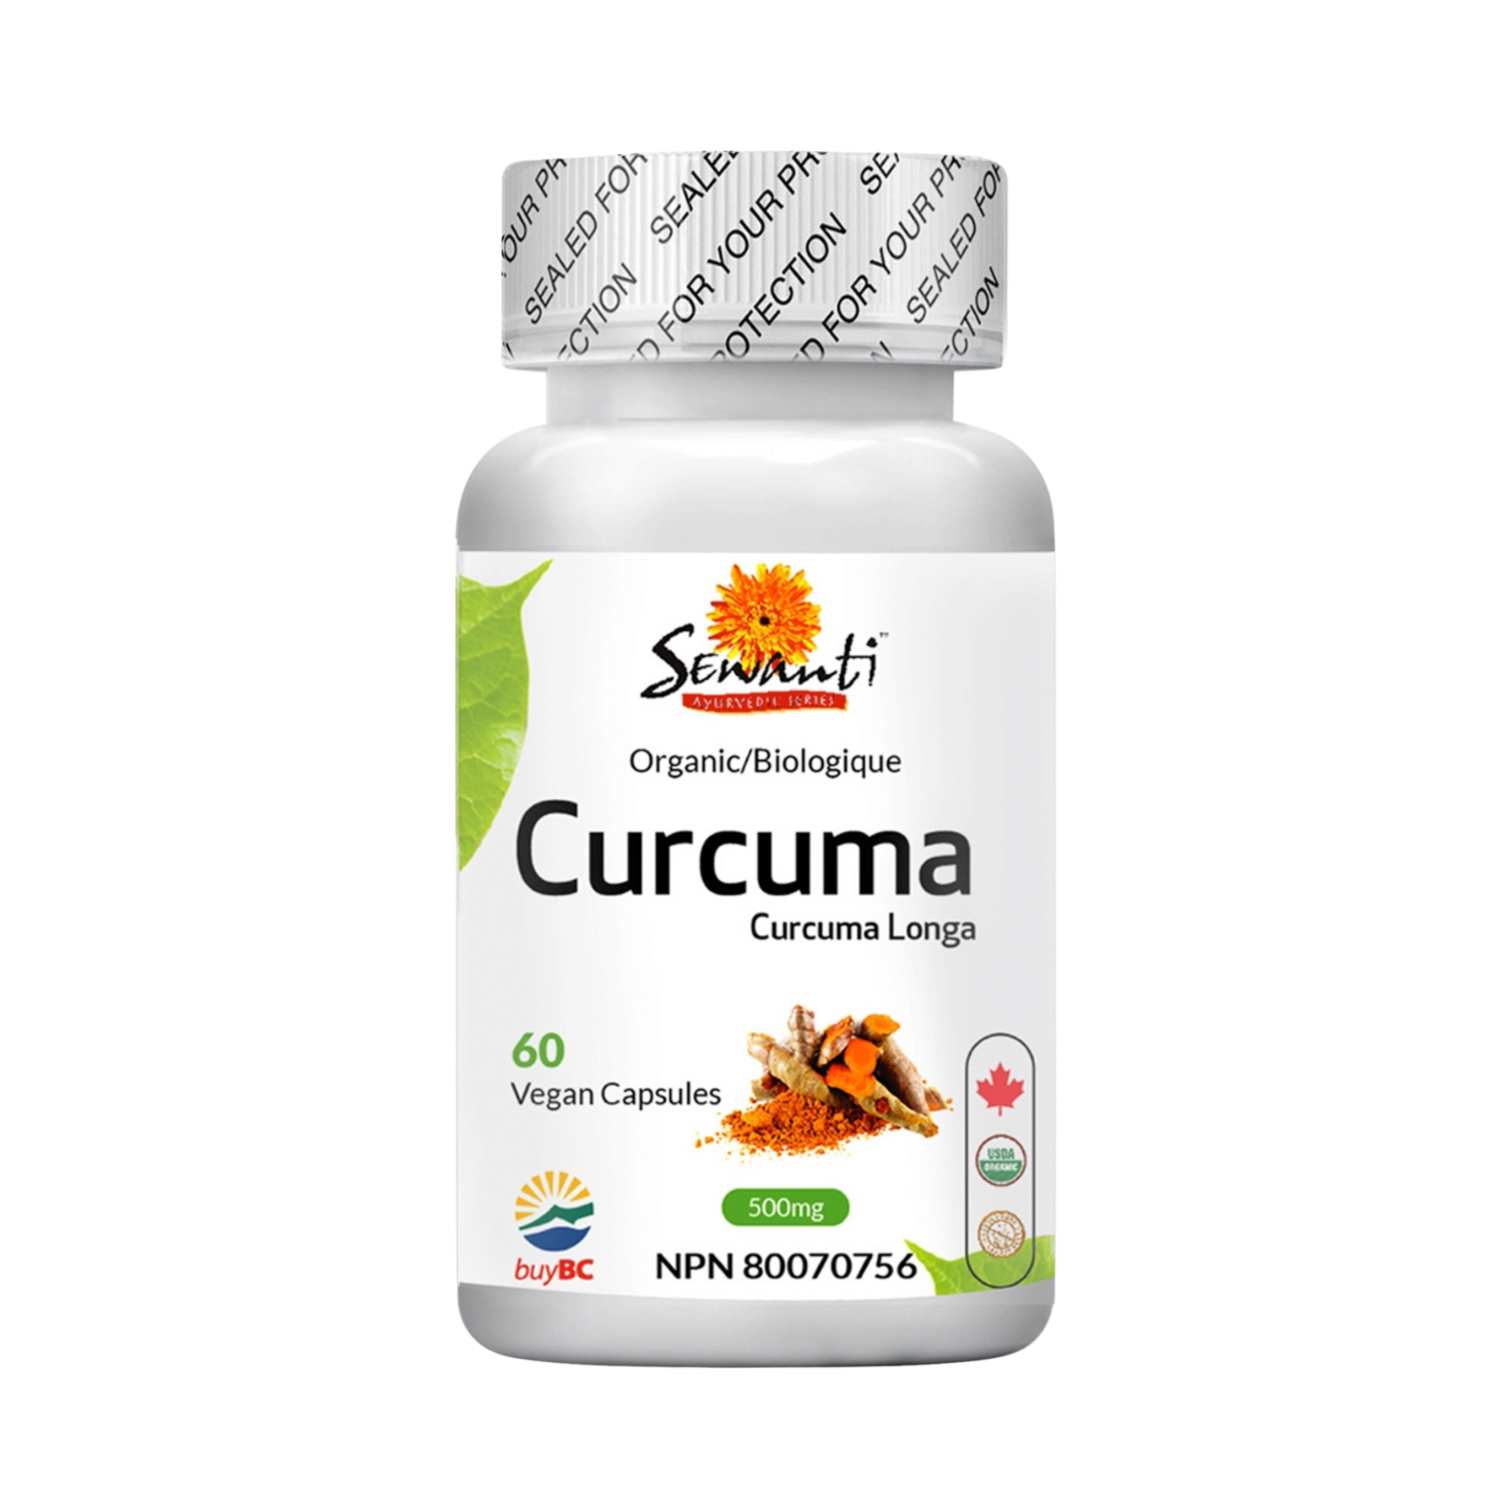 Organic Curcuma/Turmeric Capsules - Curcuma Longa is traditionally used in Ayurveda to relieve pain and inflammation and assist in the healing of minor wounds such as cuts and burns and minor skin irritations. Curcumin is used in Herbal medicine as a liver protectant and anti-inflammatory to help relieve joint pain. Sewanti Organic Curcuma contains concentrated Organic extract of 95% Curcuminoids.